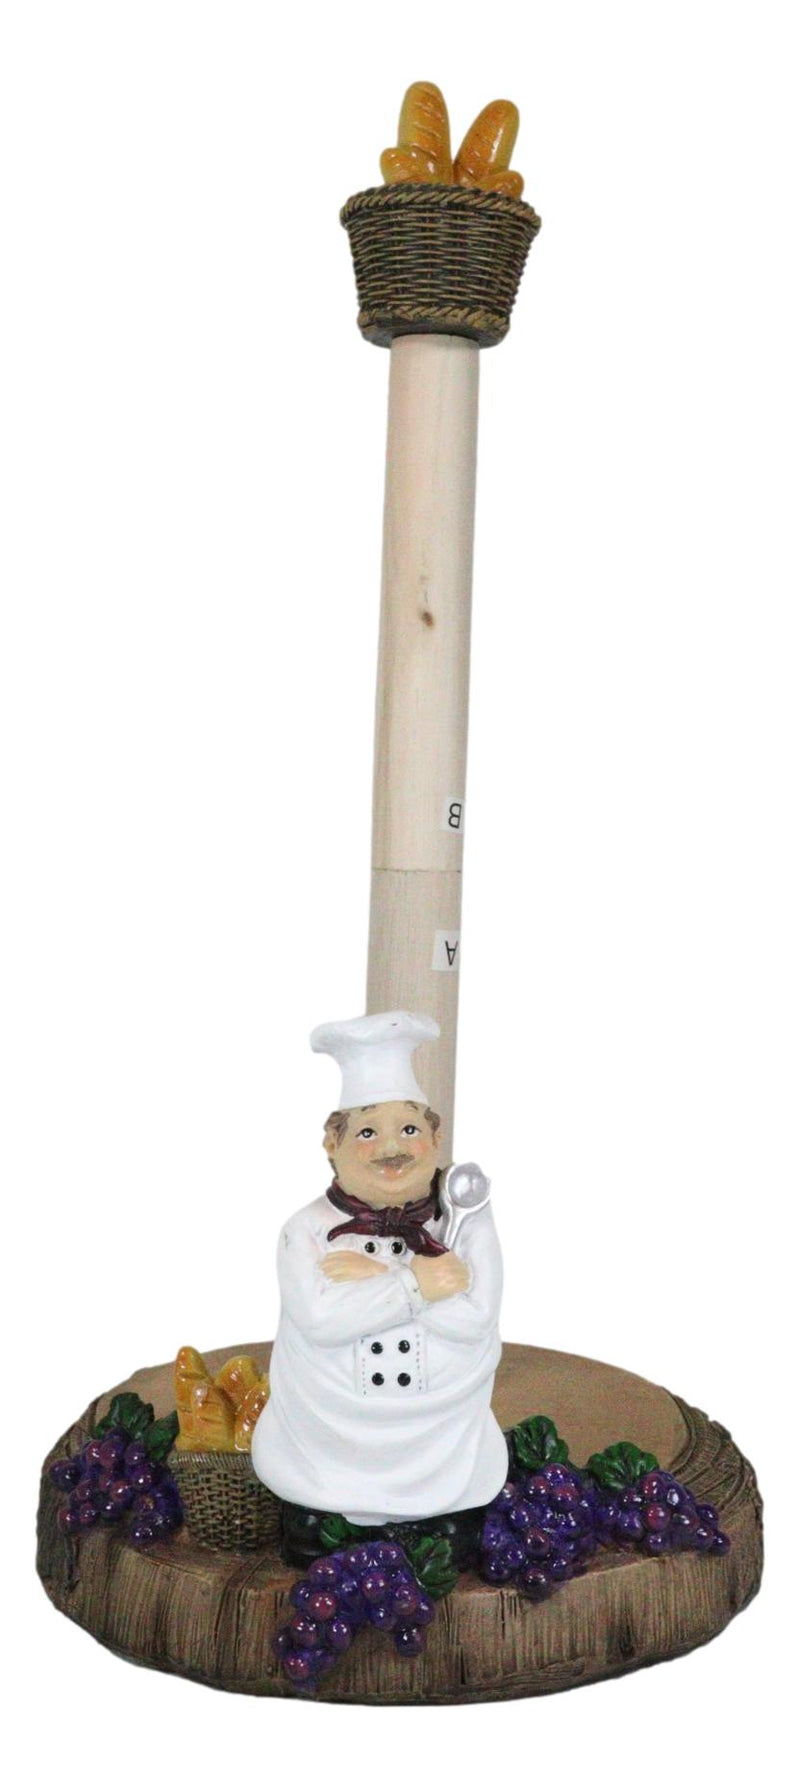 Kitchen Culinary Bread And Grapes Chef Paper Towel Holder Dispenser Figurine